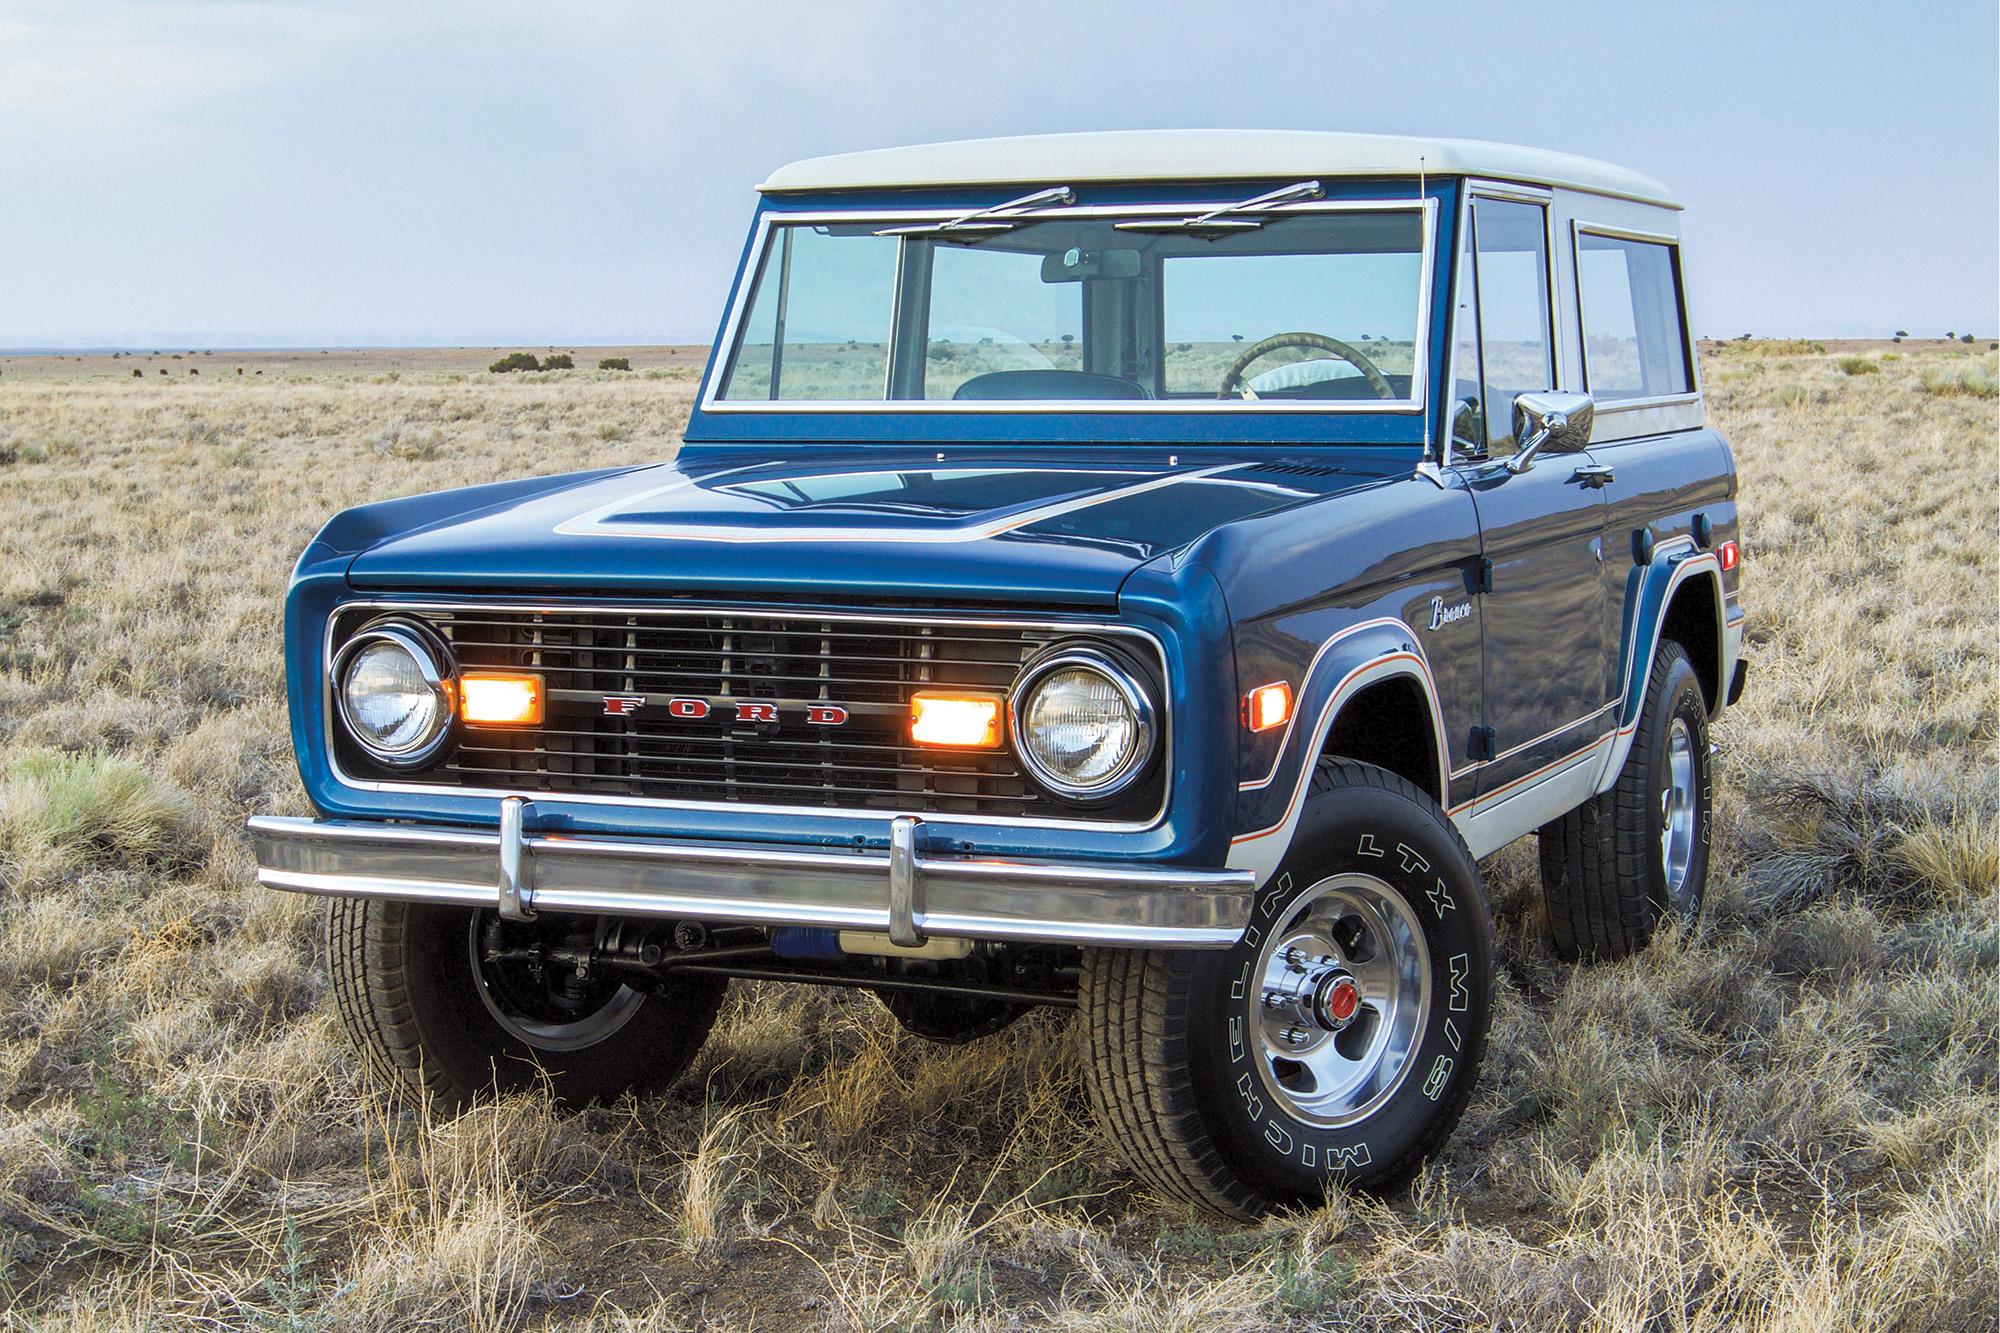 That clean 1972 Ford Bronco he bought for Colorado four-wheeling turned out to be a rather special rig